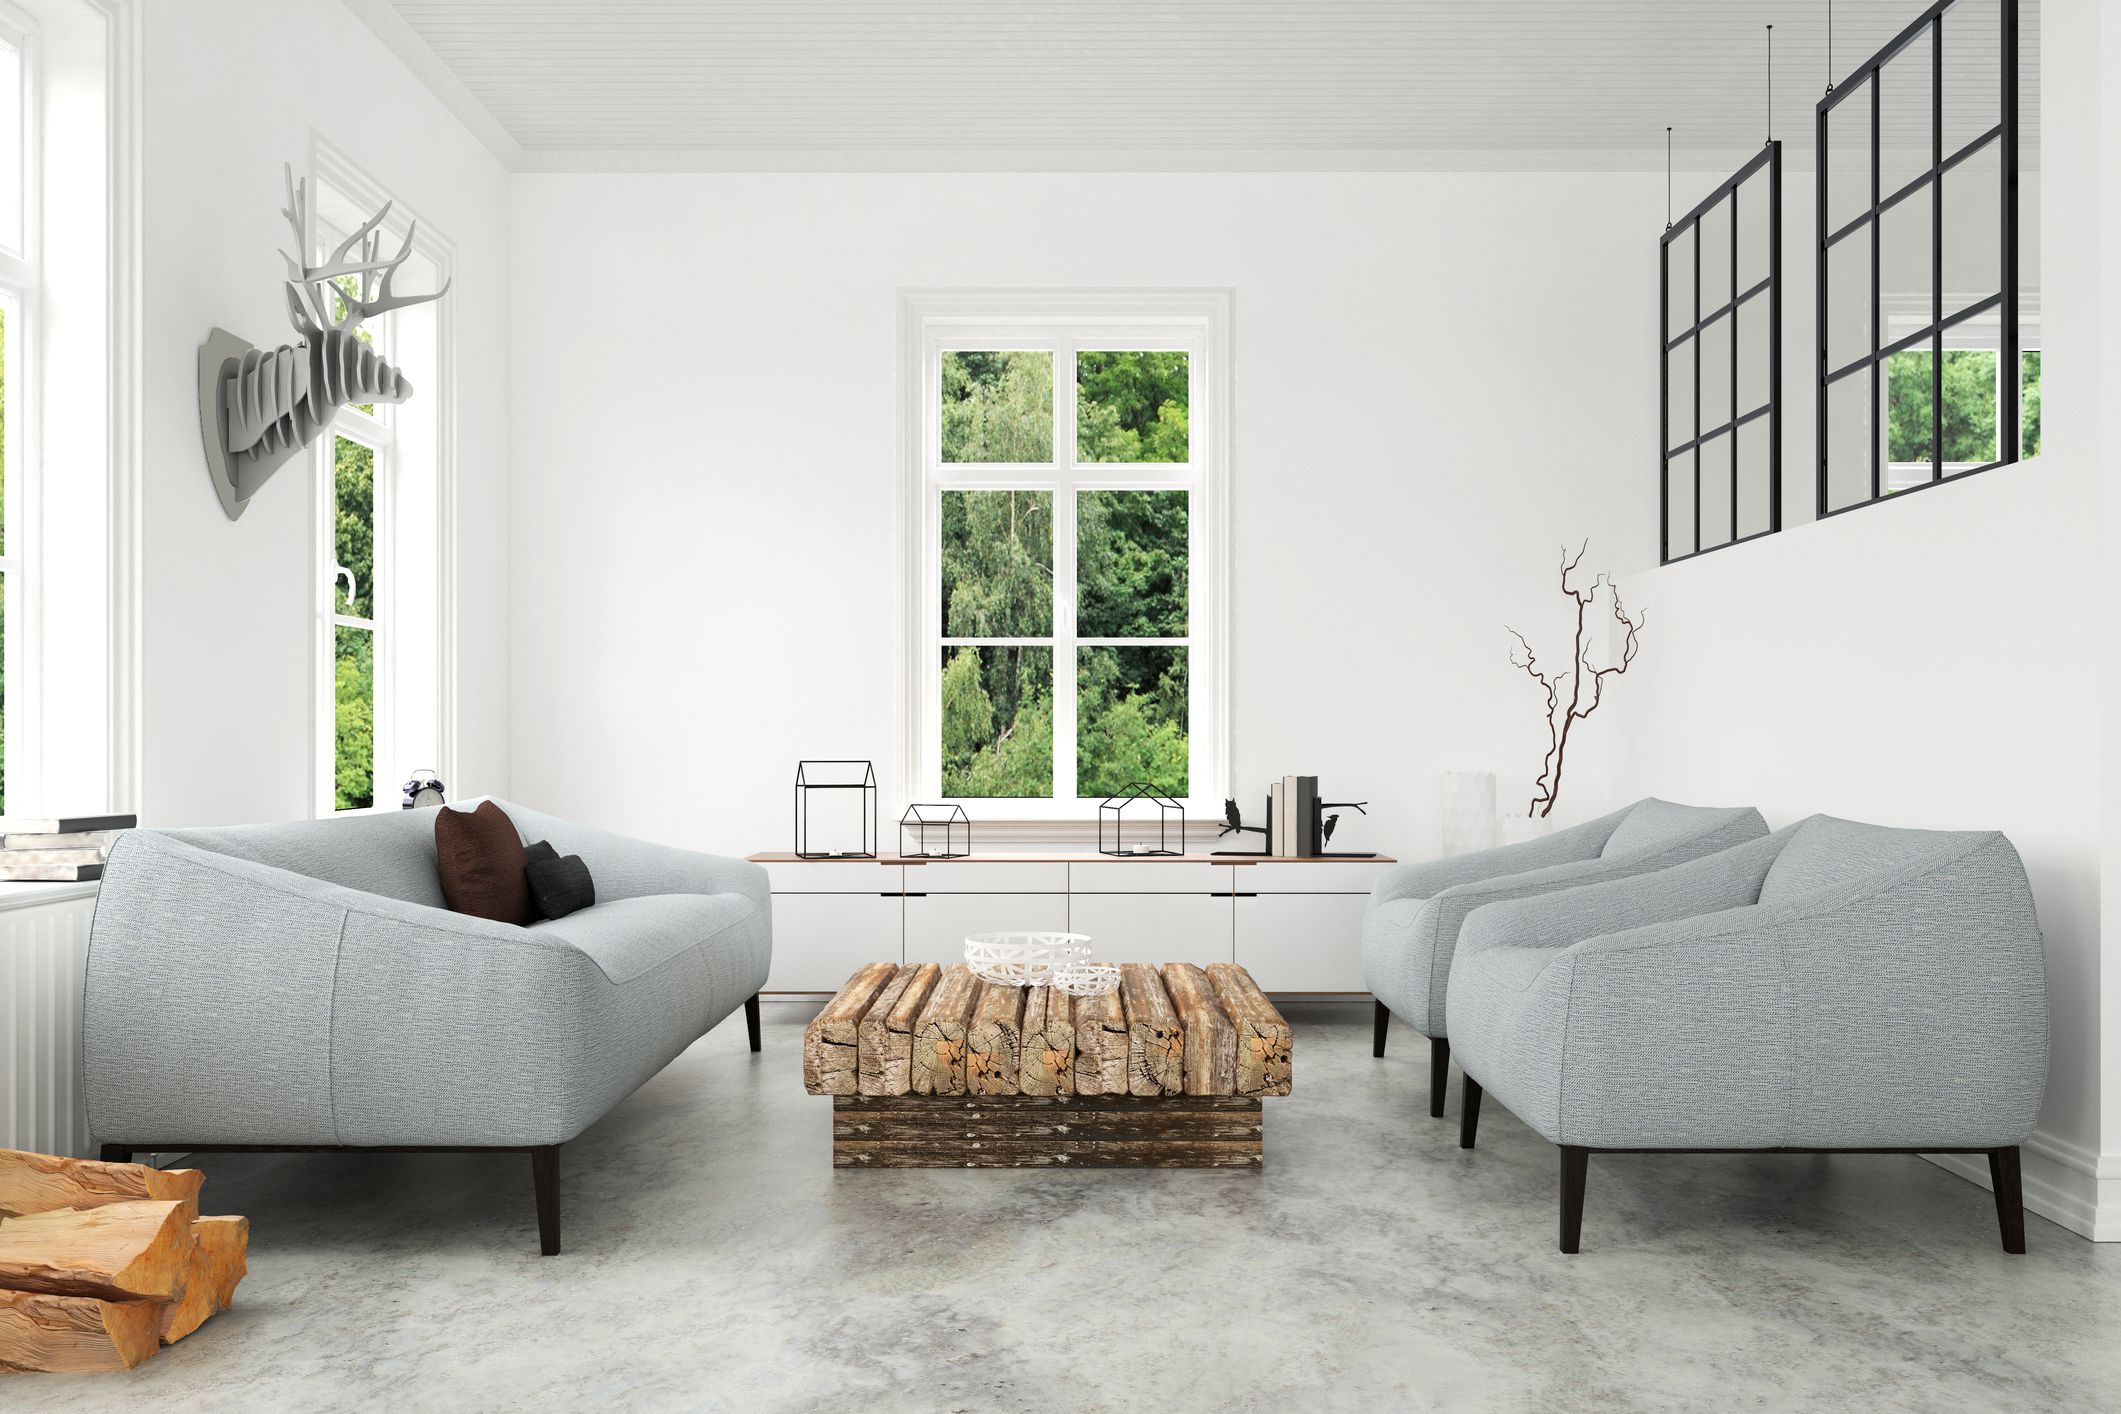 The Most Crucial Aspects About Concrete Floors You Didn't Know About